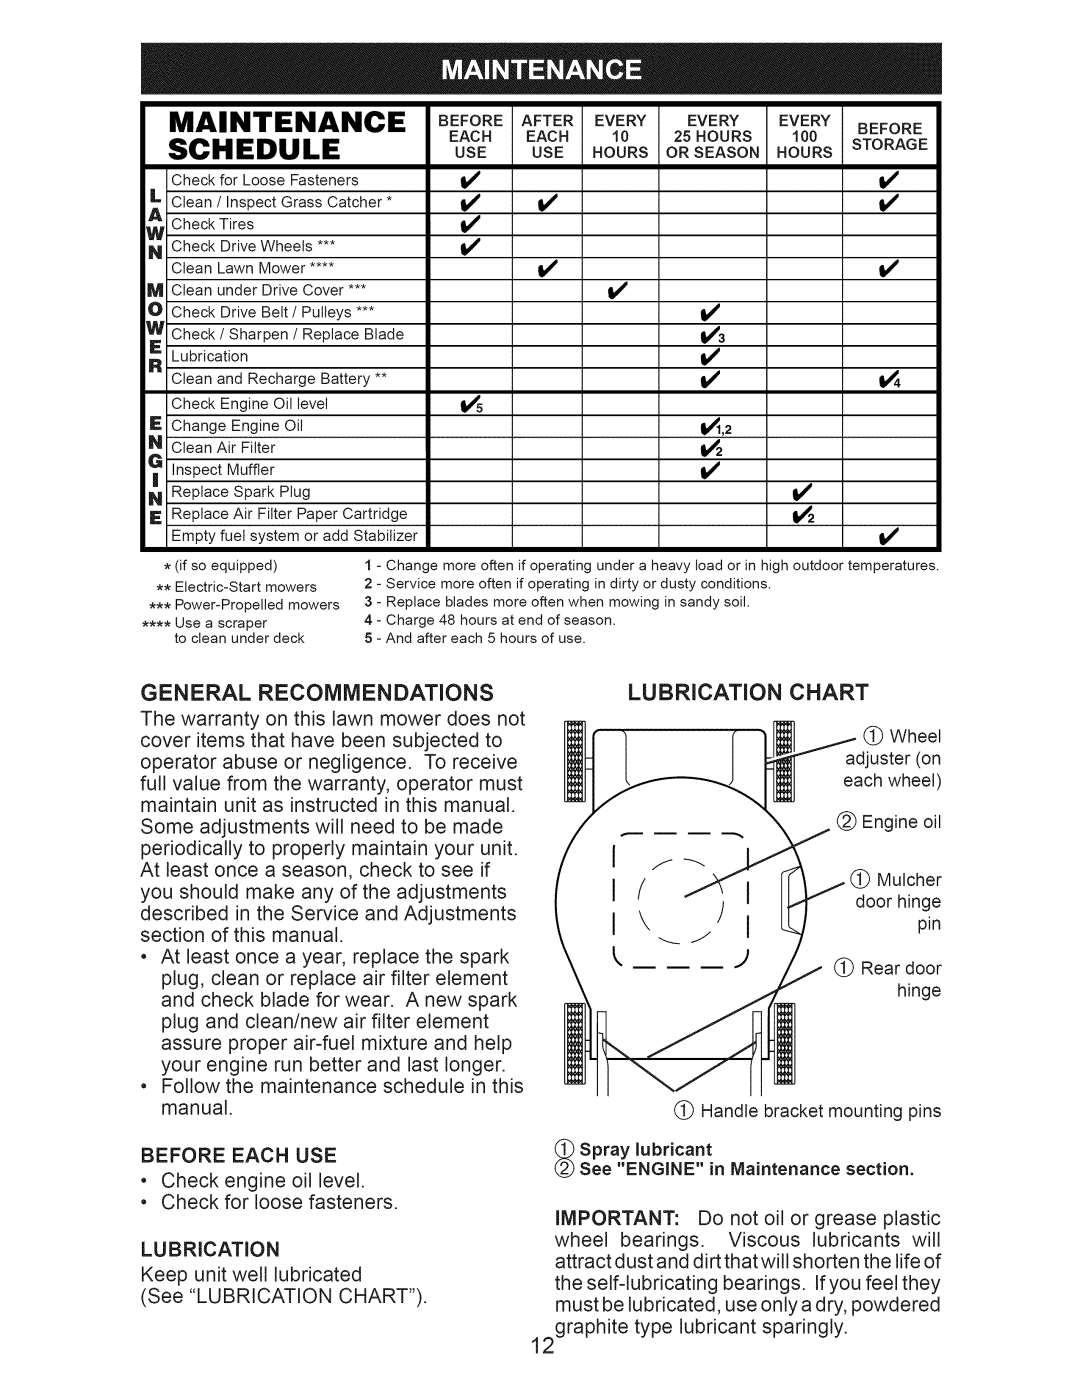 Craftsman 917.374353 owner manual Maintenance, Schedule, Use Hours 